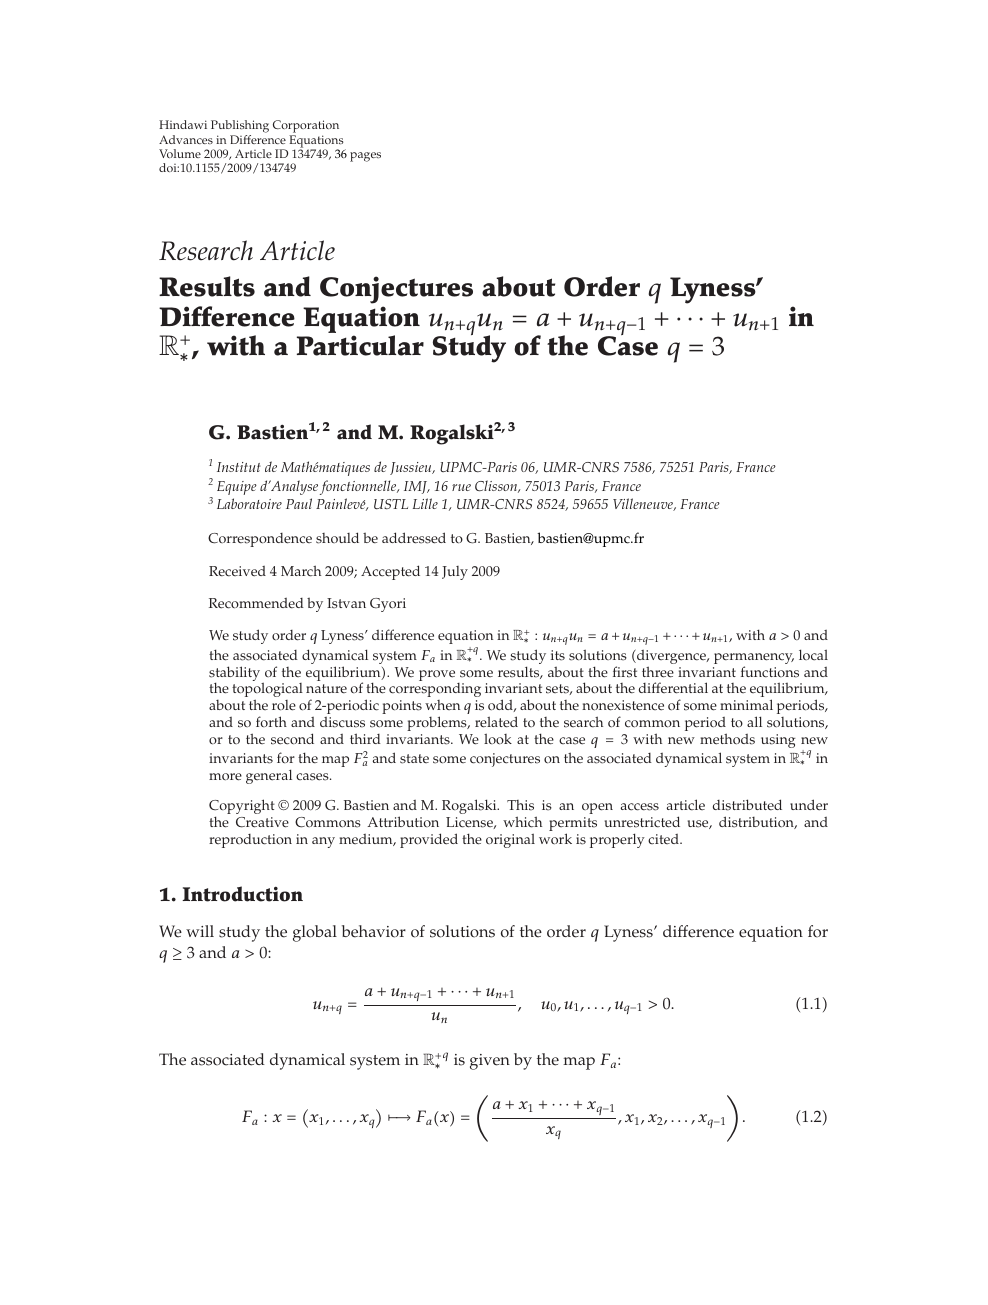 Results And Conjectures About Order Lyness Difference Equation In With A Particular Study Of The Case Topic Of Research Paper In Mathematics Download Scholarly Article Pdf And Read For Free